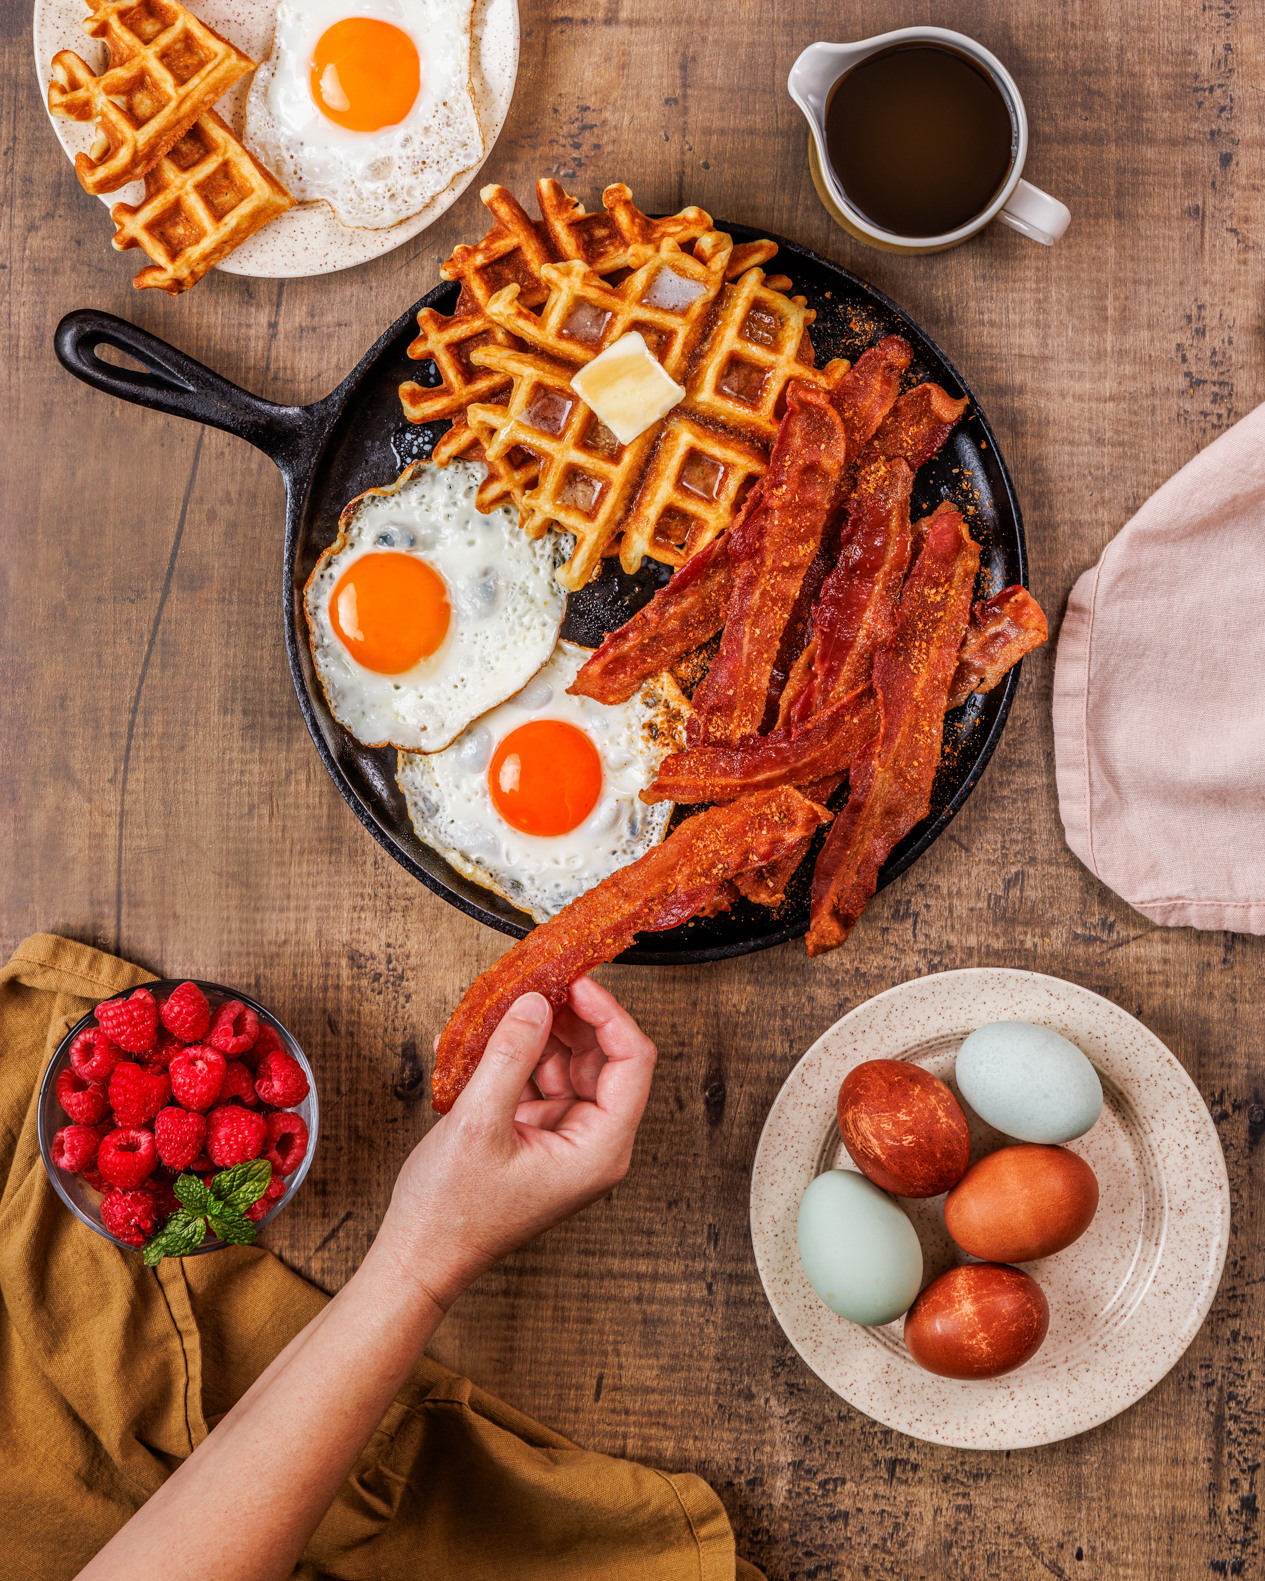 Photo of a hand reaching in to grab a piece of bacon from a family style breakfast serving.